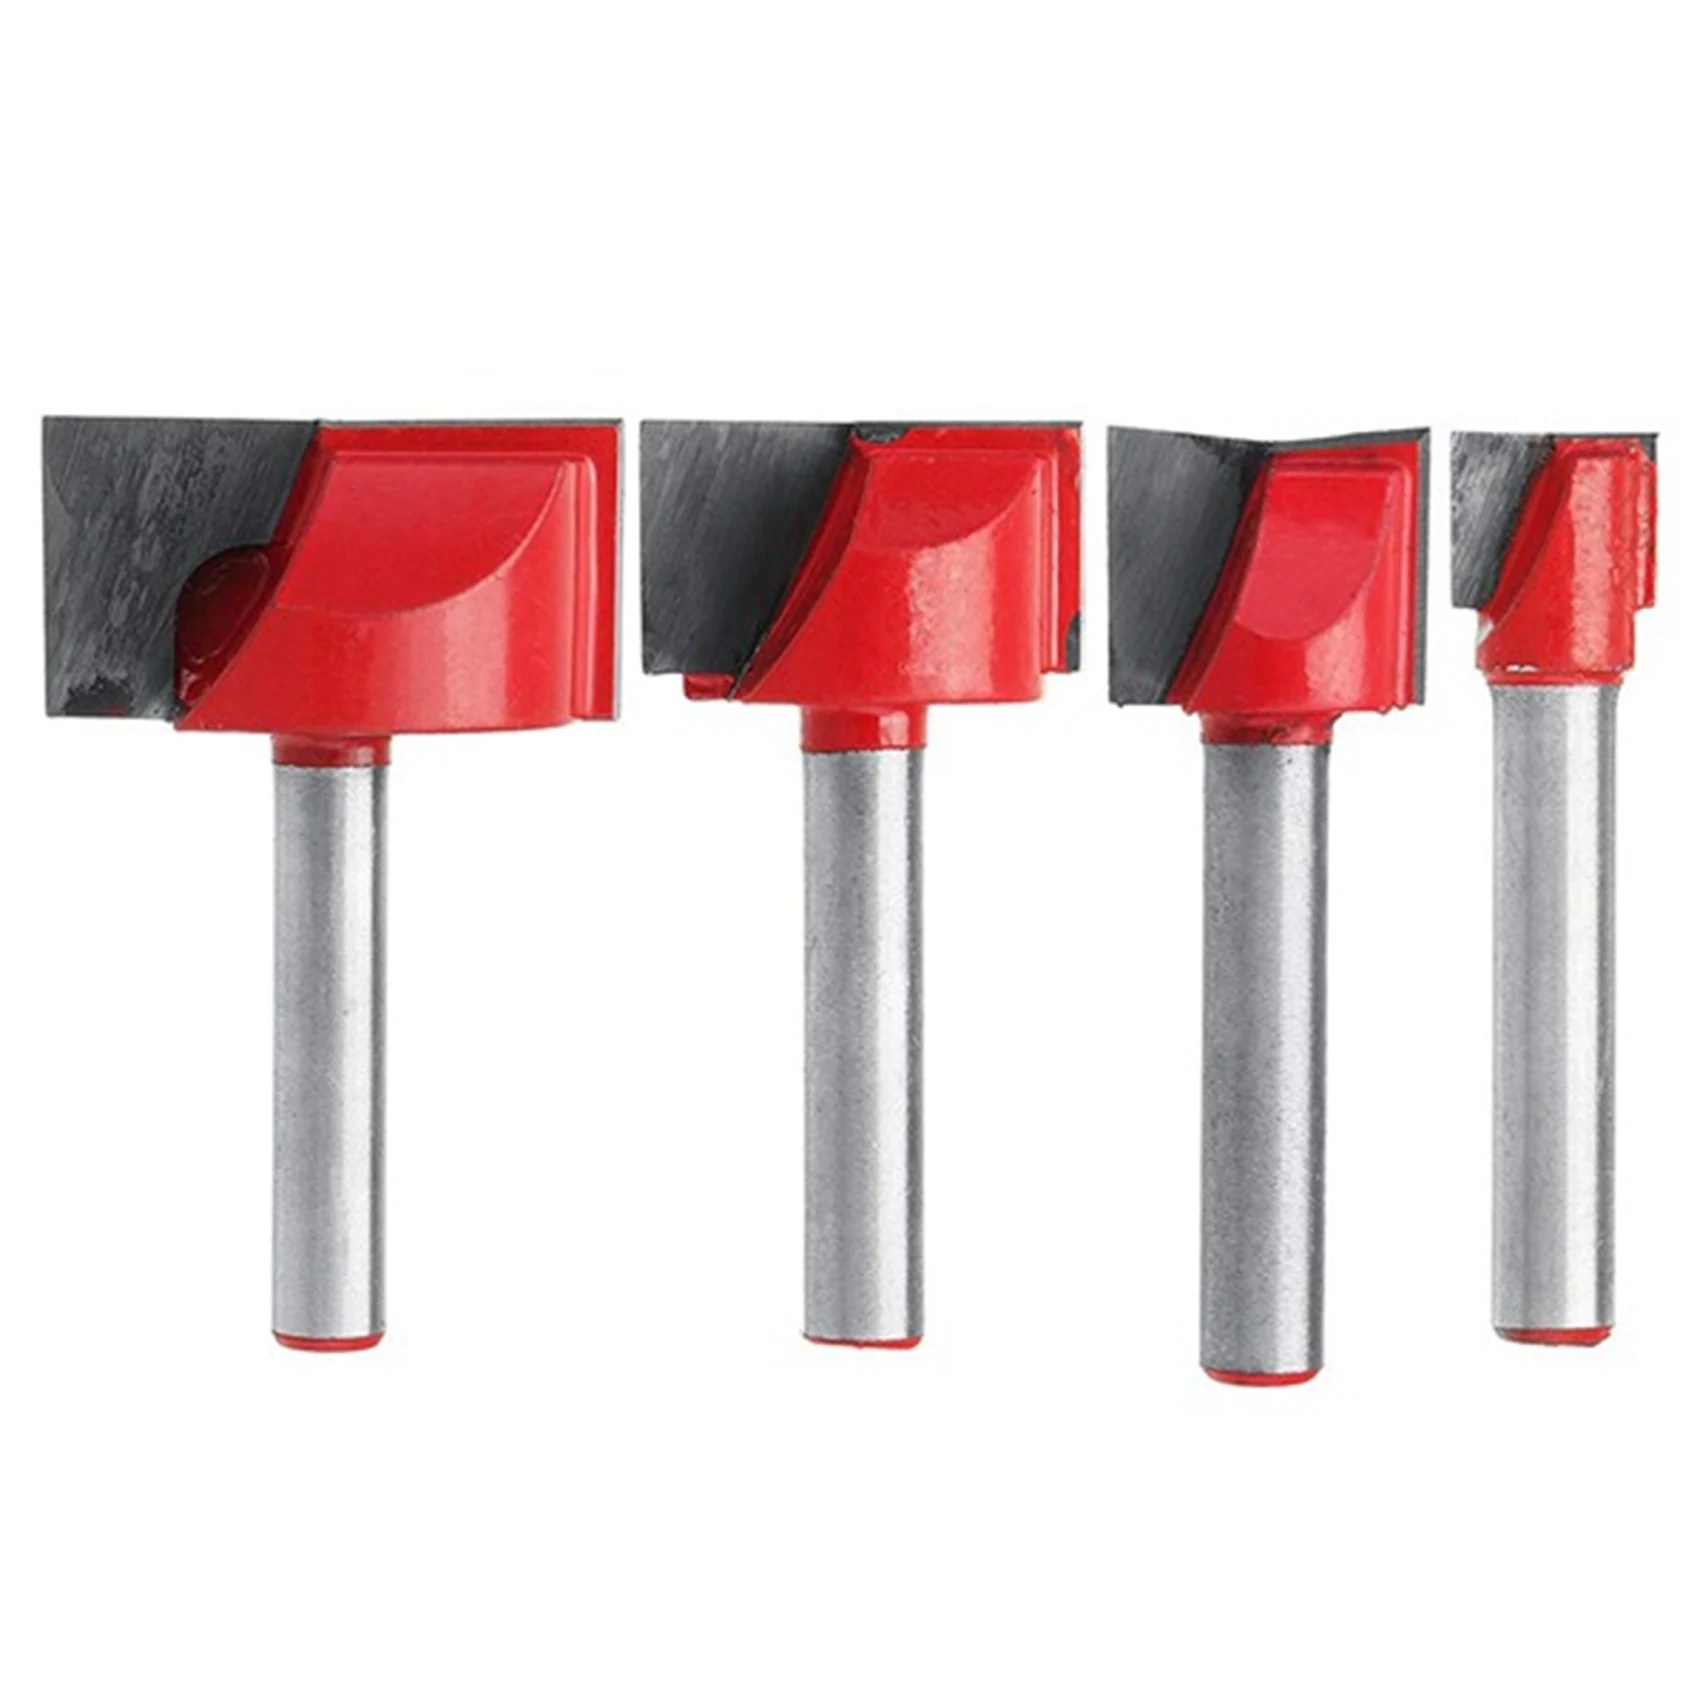 

4Pcs Bottom Cleaning Engraving Bit Wood CNC Router Bits 10/15/22/30mm Milling Cutter Endmill for Wood Milling Cutter Set